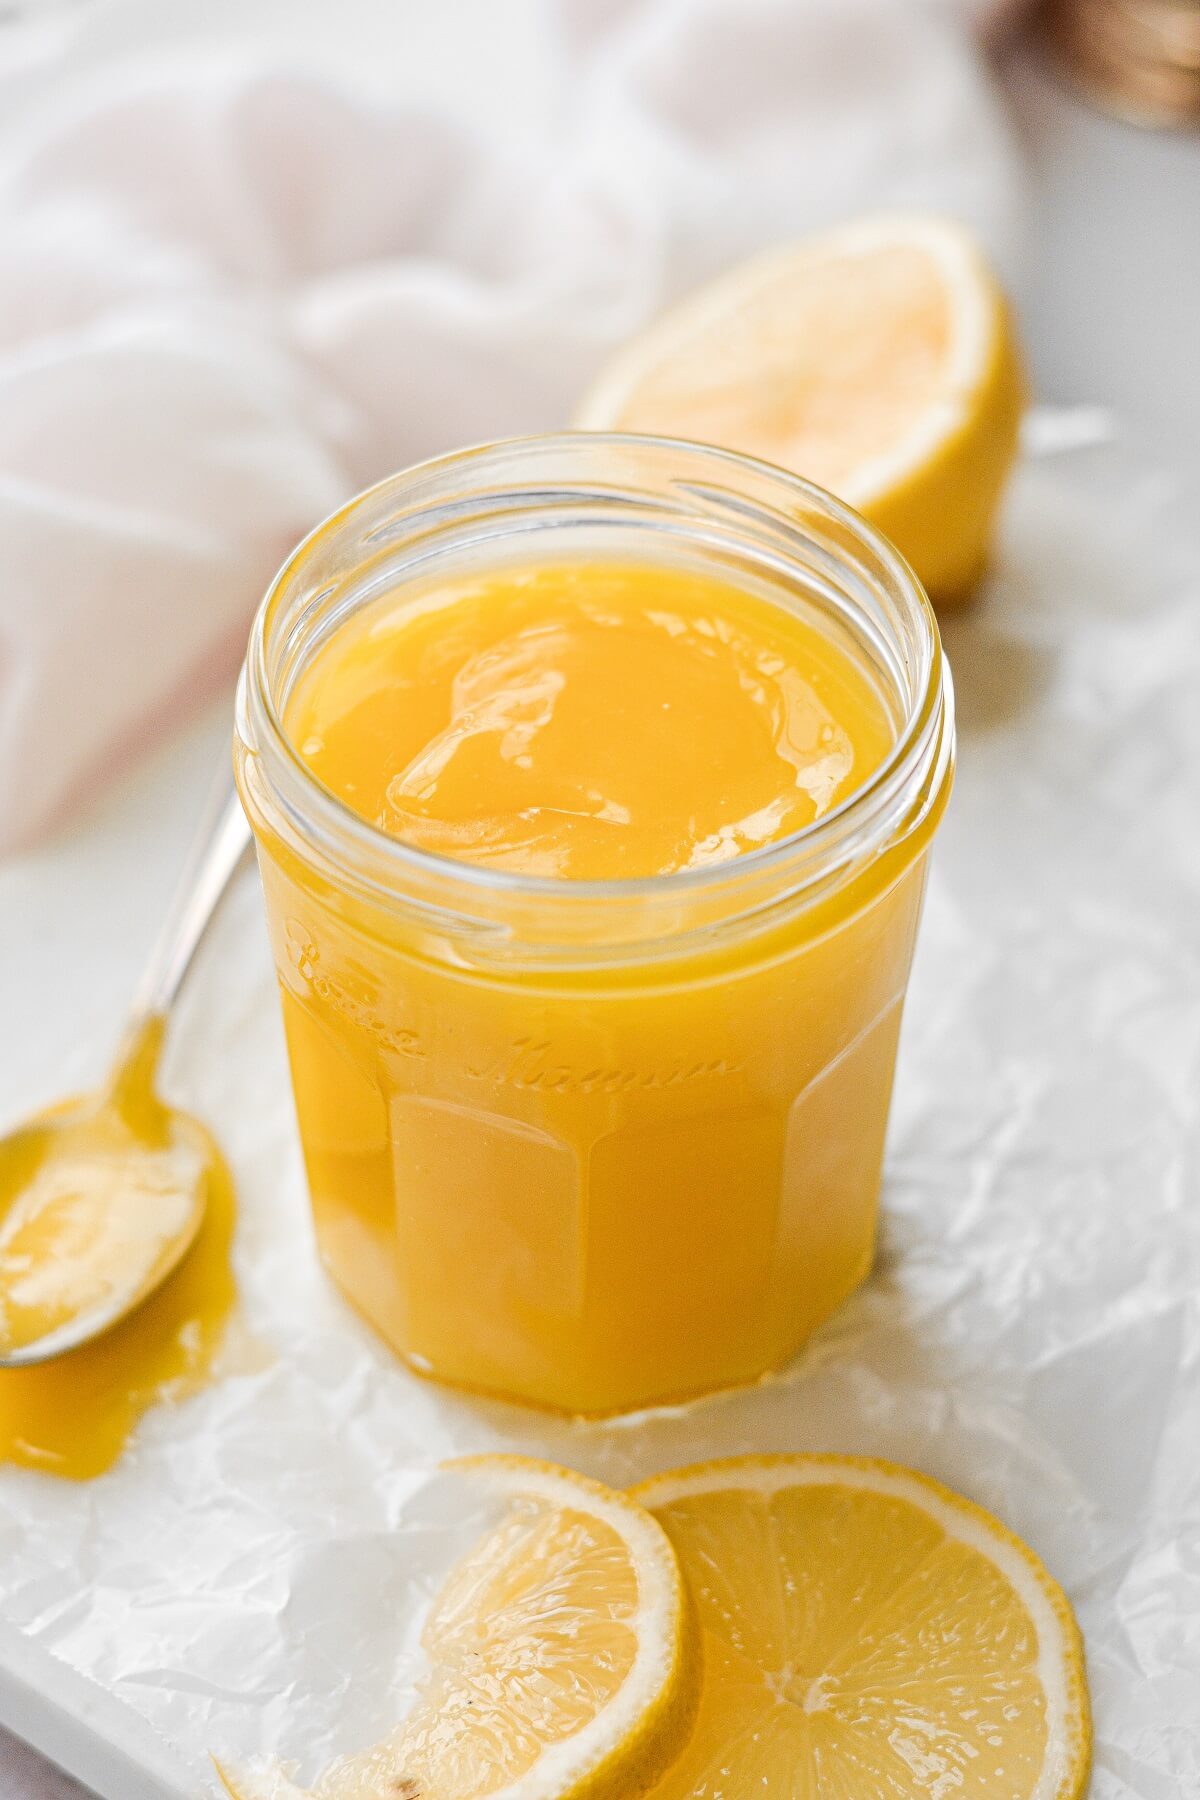 A jar of homemade lemon curd with lemon slices scattered around.